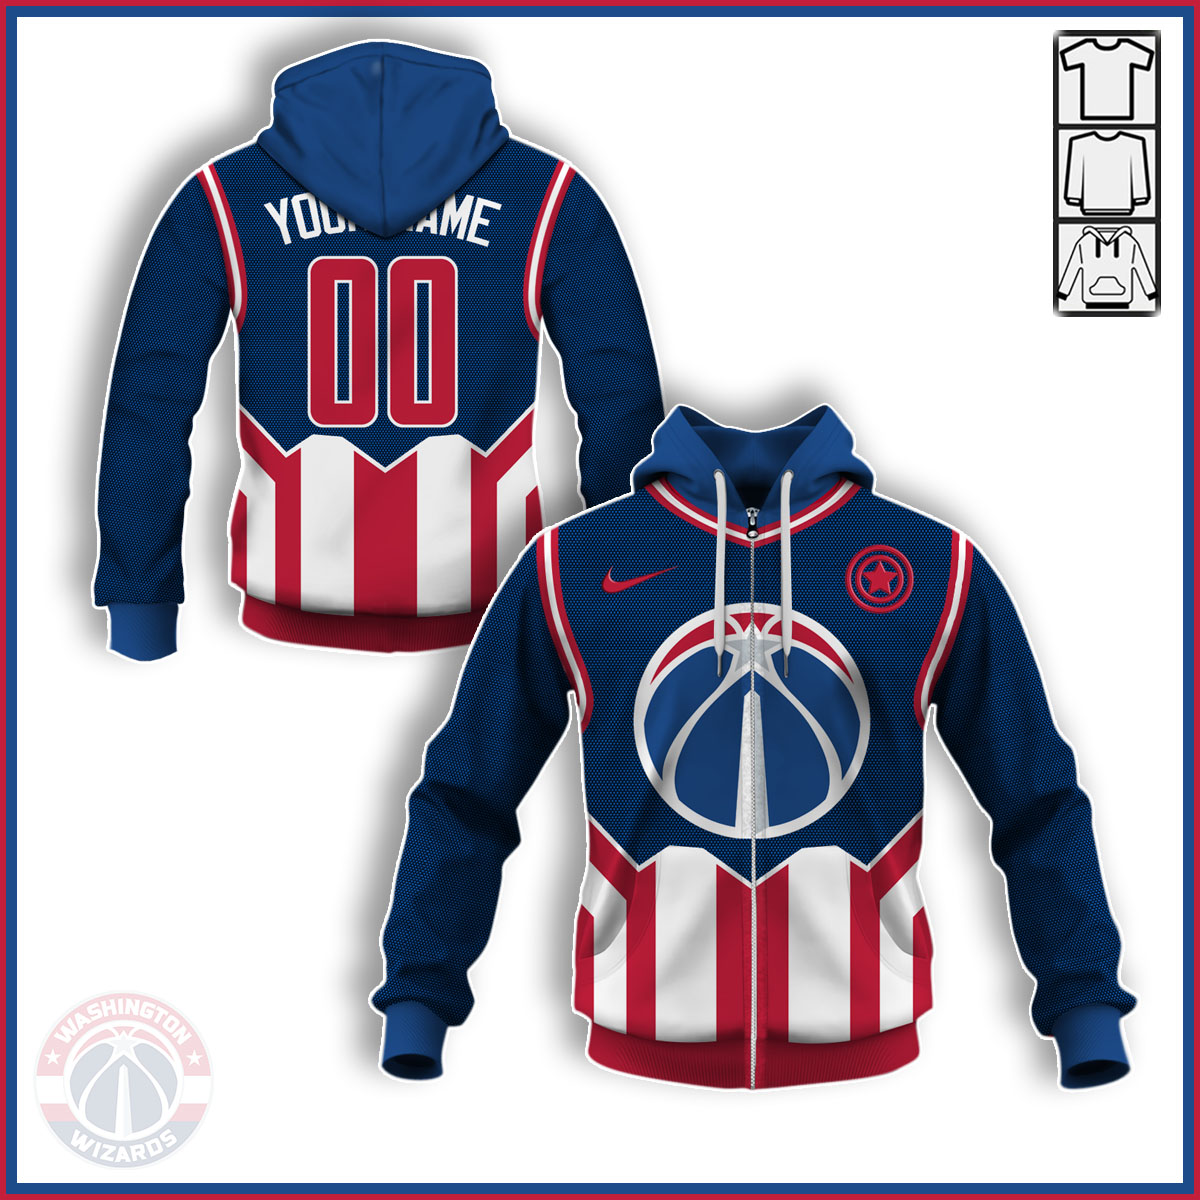 Washington Wizards x Captain America jersey concept designed by